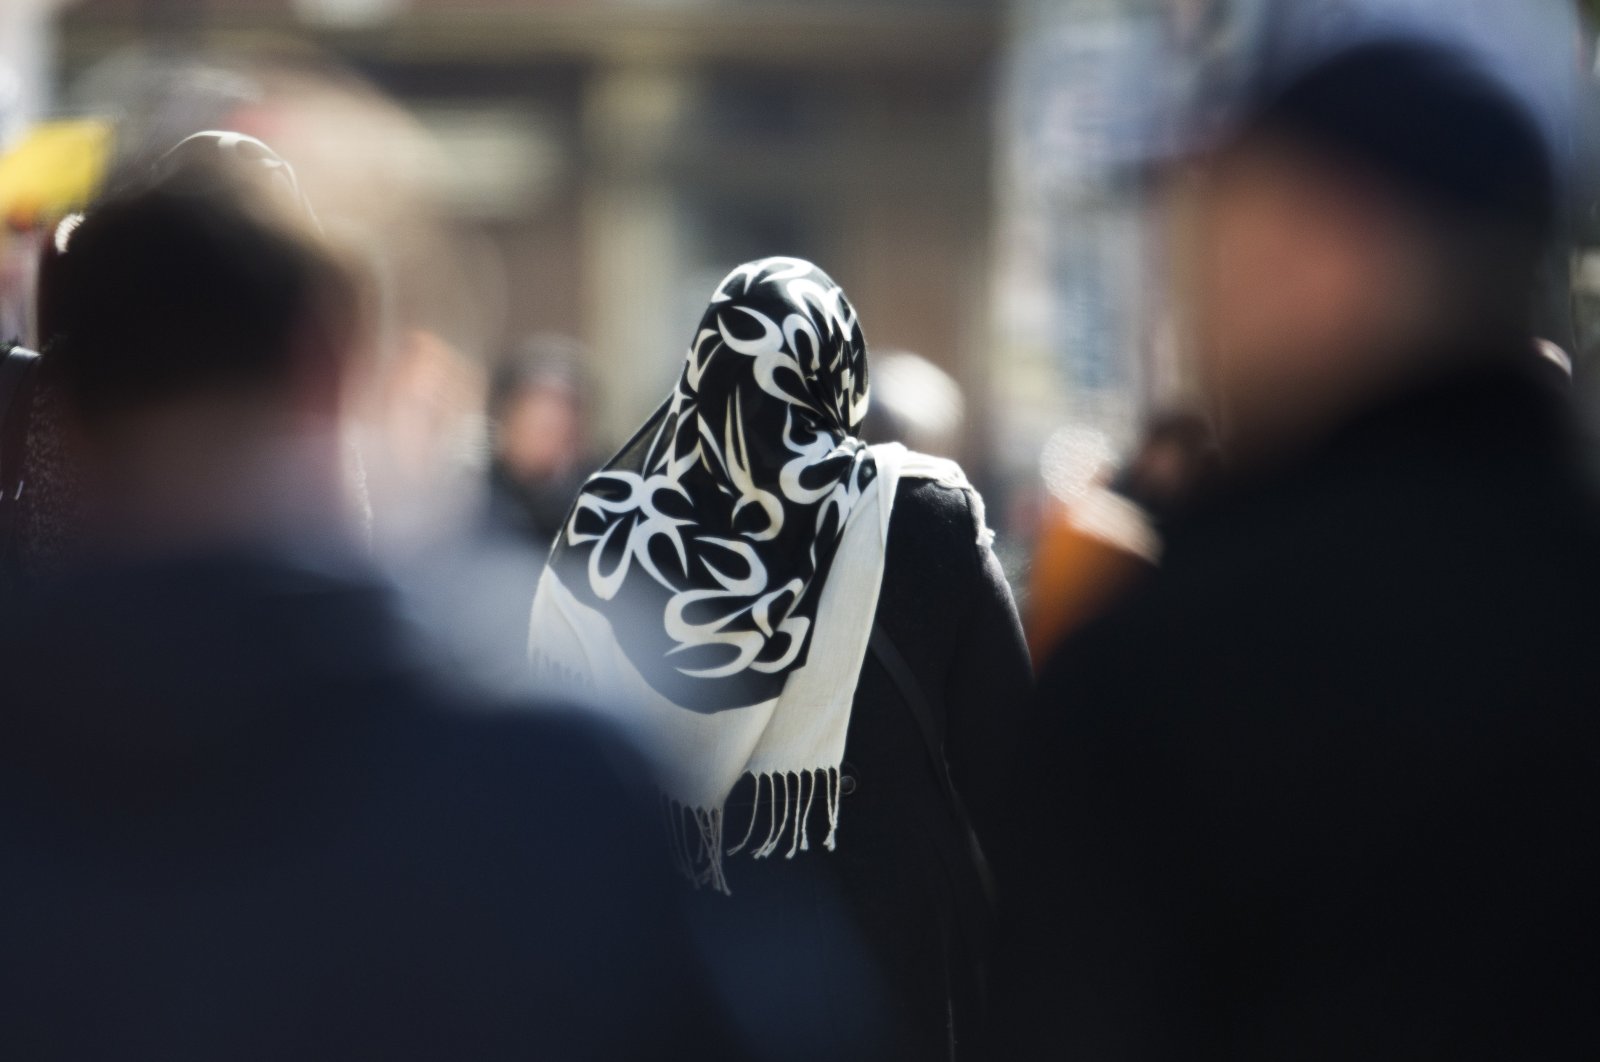 A woman with a headscarf, a traditional dress for Muslim women, walks on a street in the Neukoelln district in Berlin, Germany. (AP Photo)